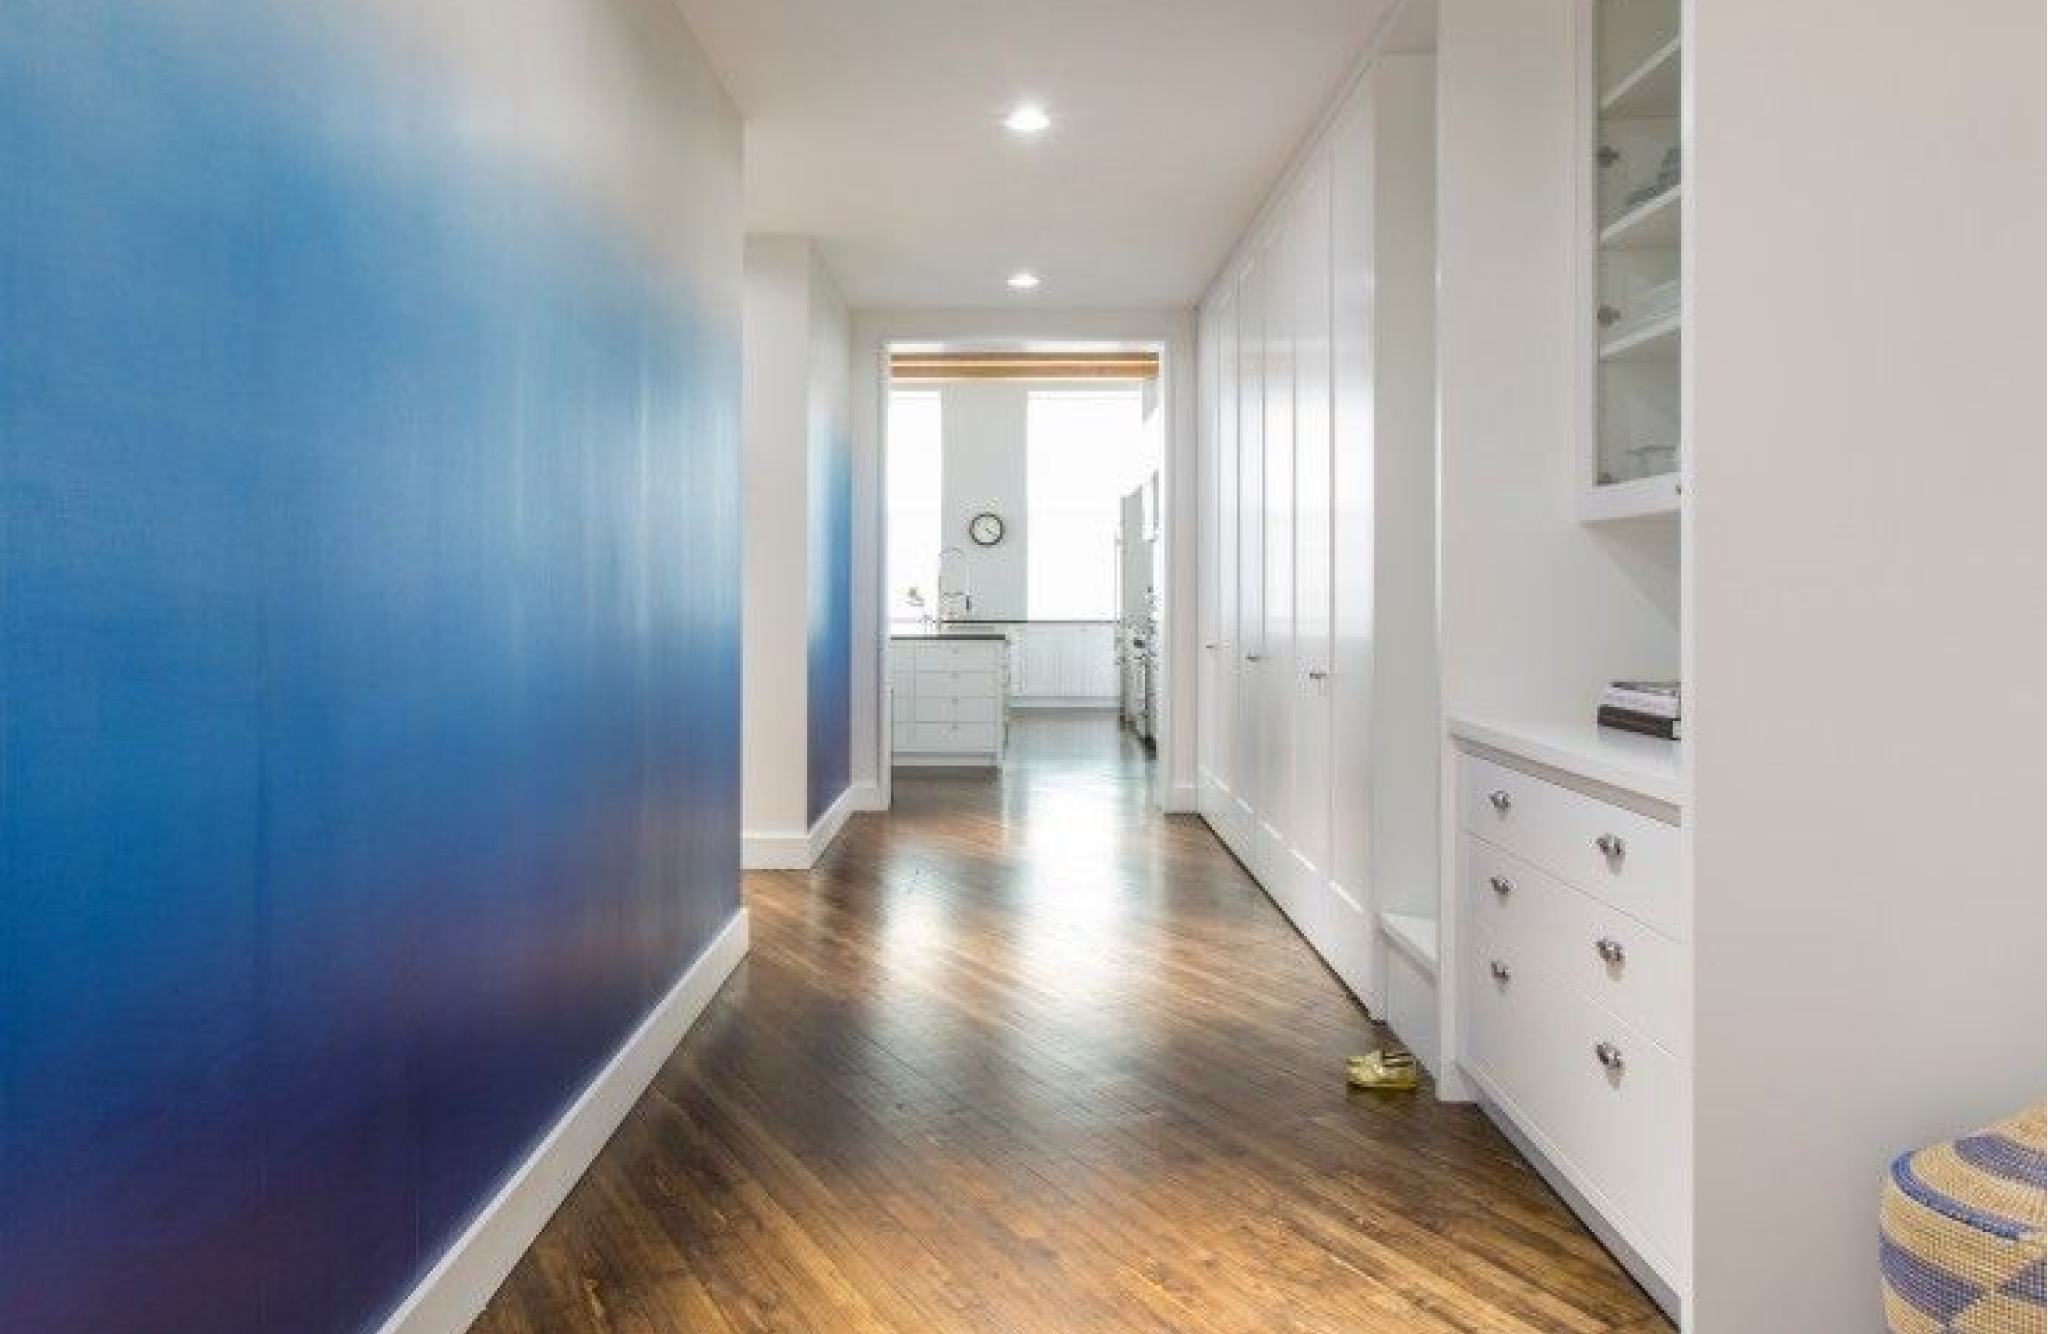 hallway with blue Ombre style